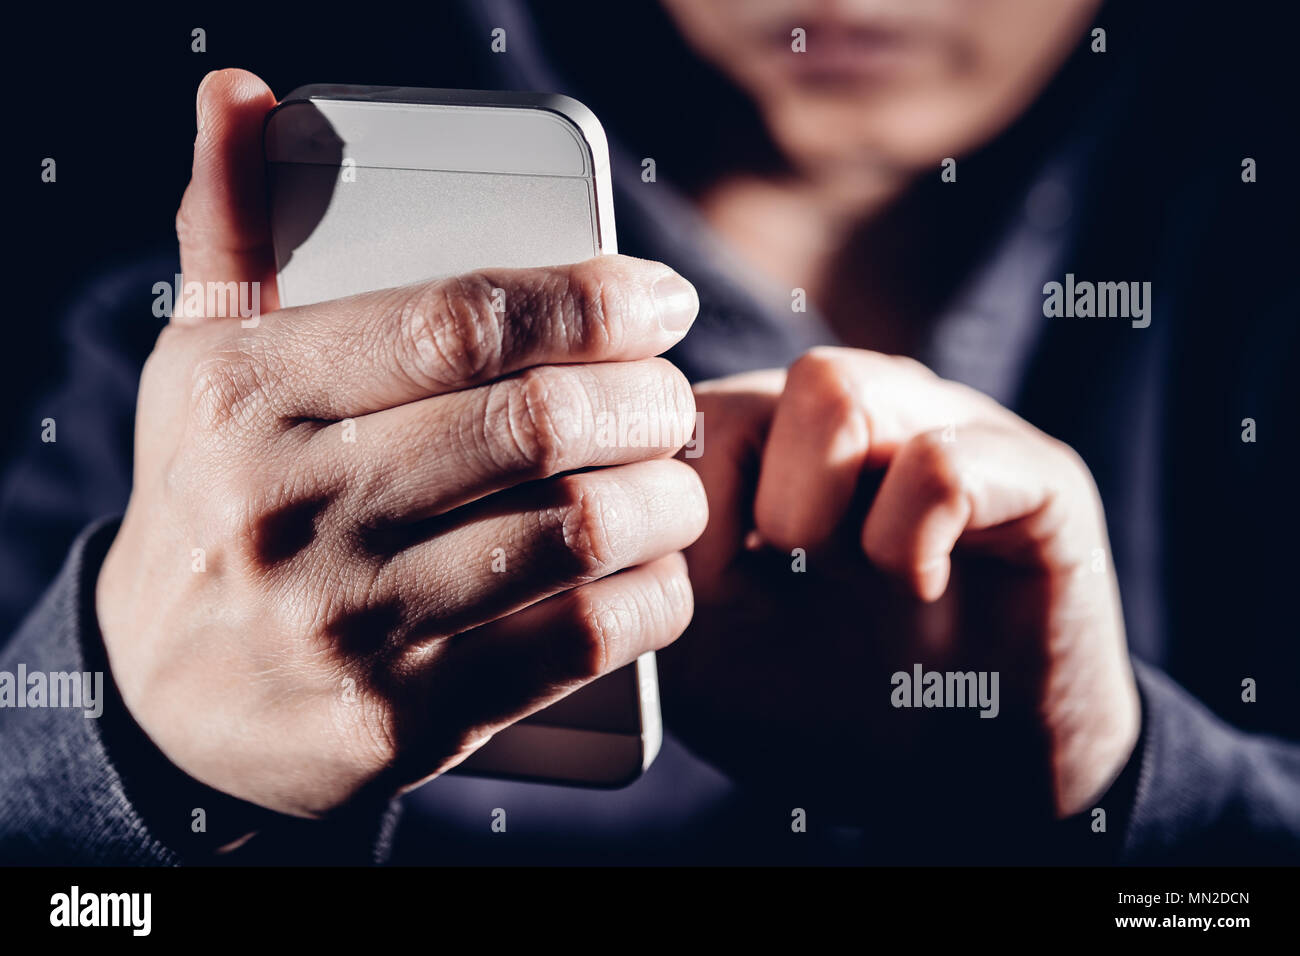 Hooded cyber crime hacker using mobile phone internet hacking in to cyberspace,online personal data security concept. Stock Photo